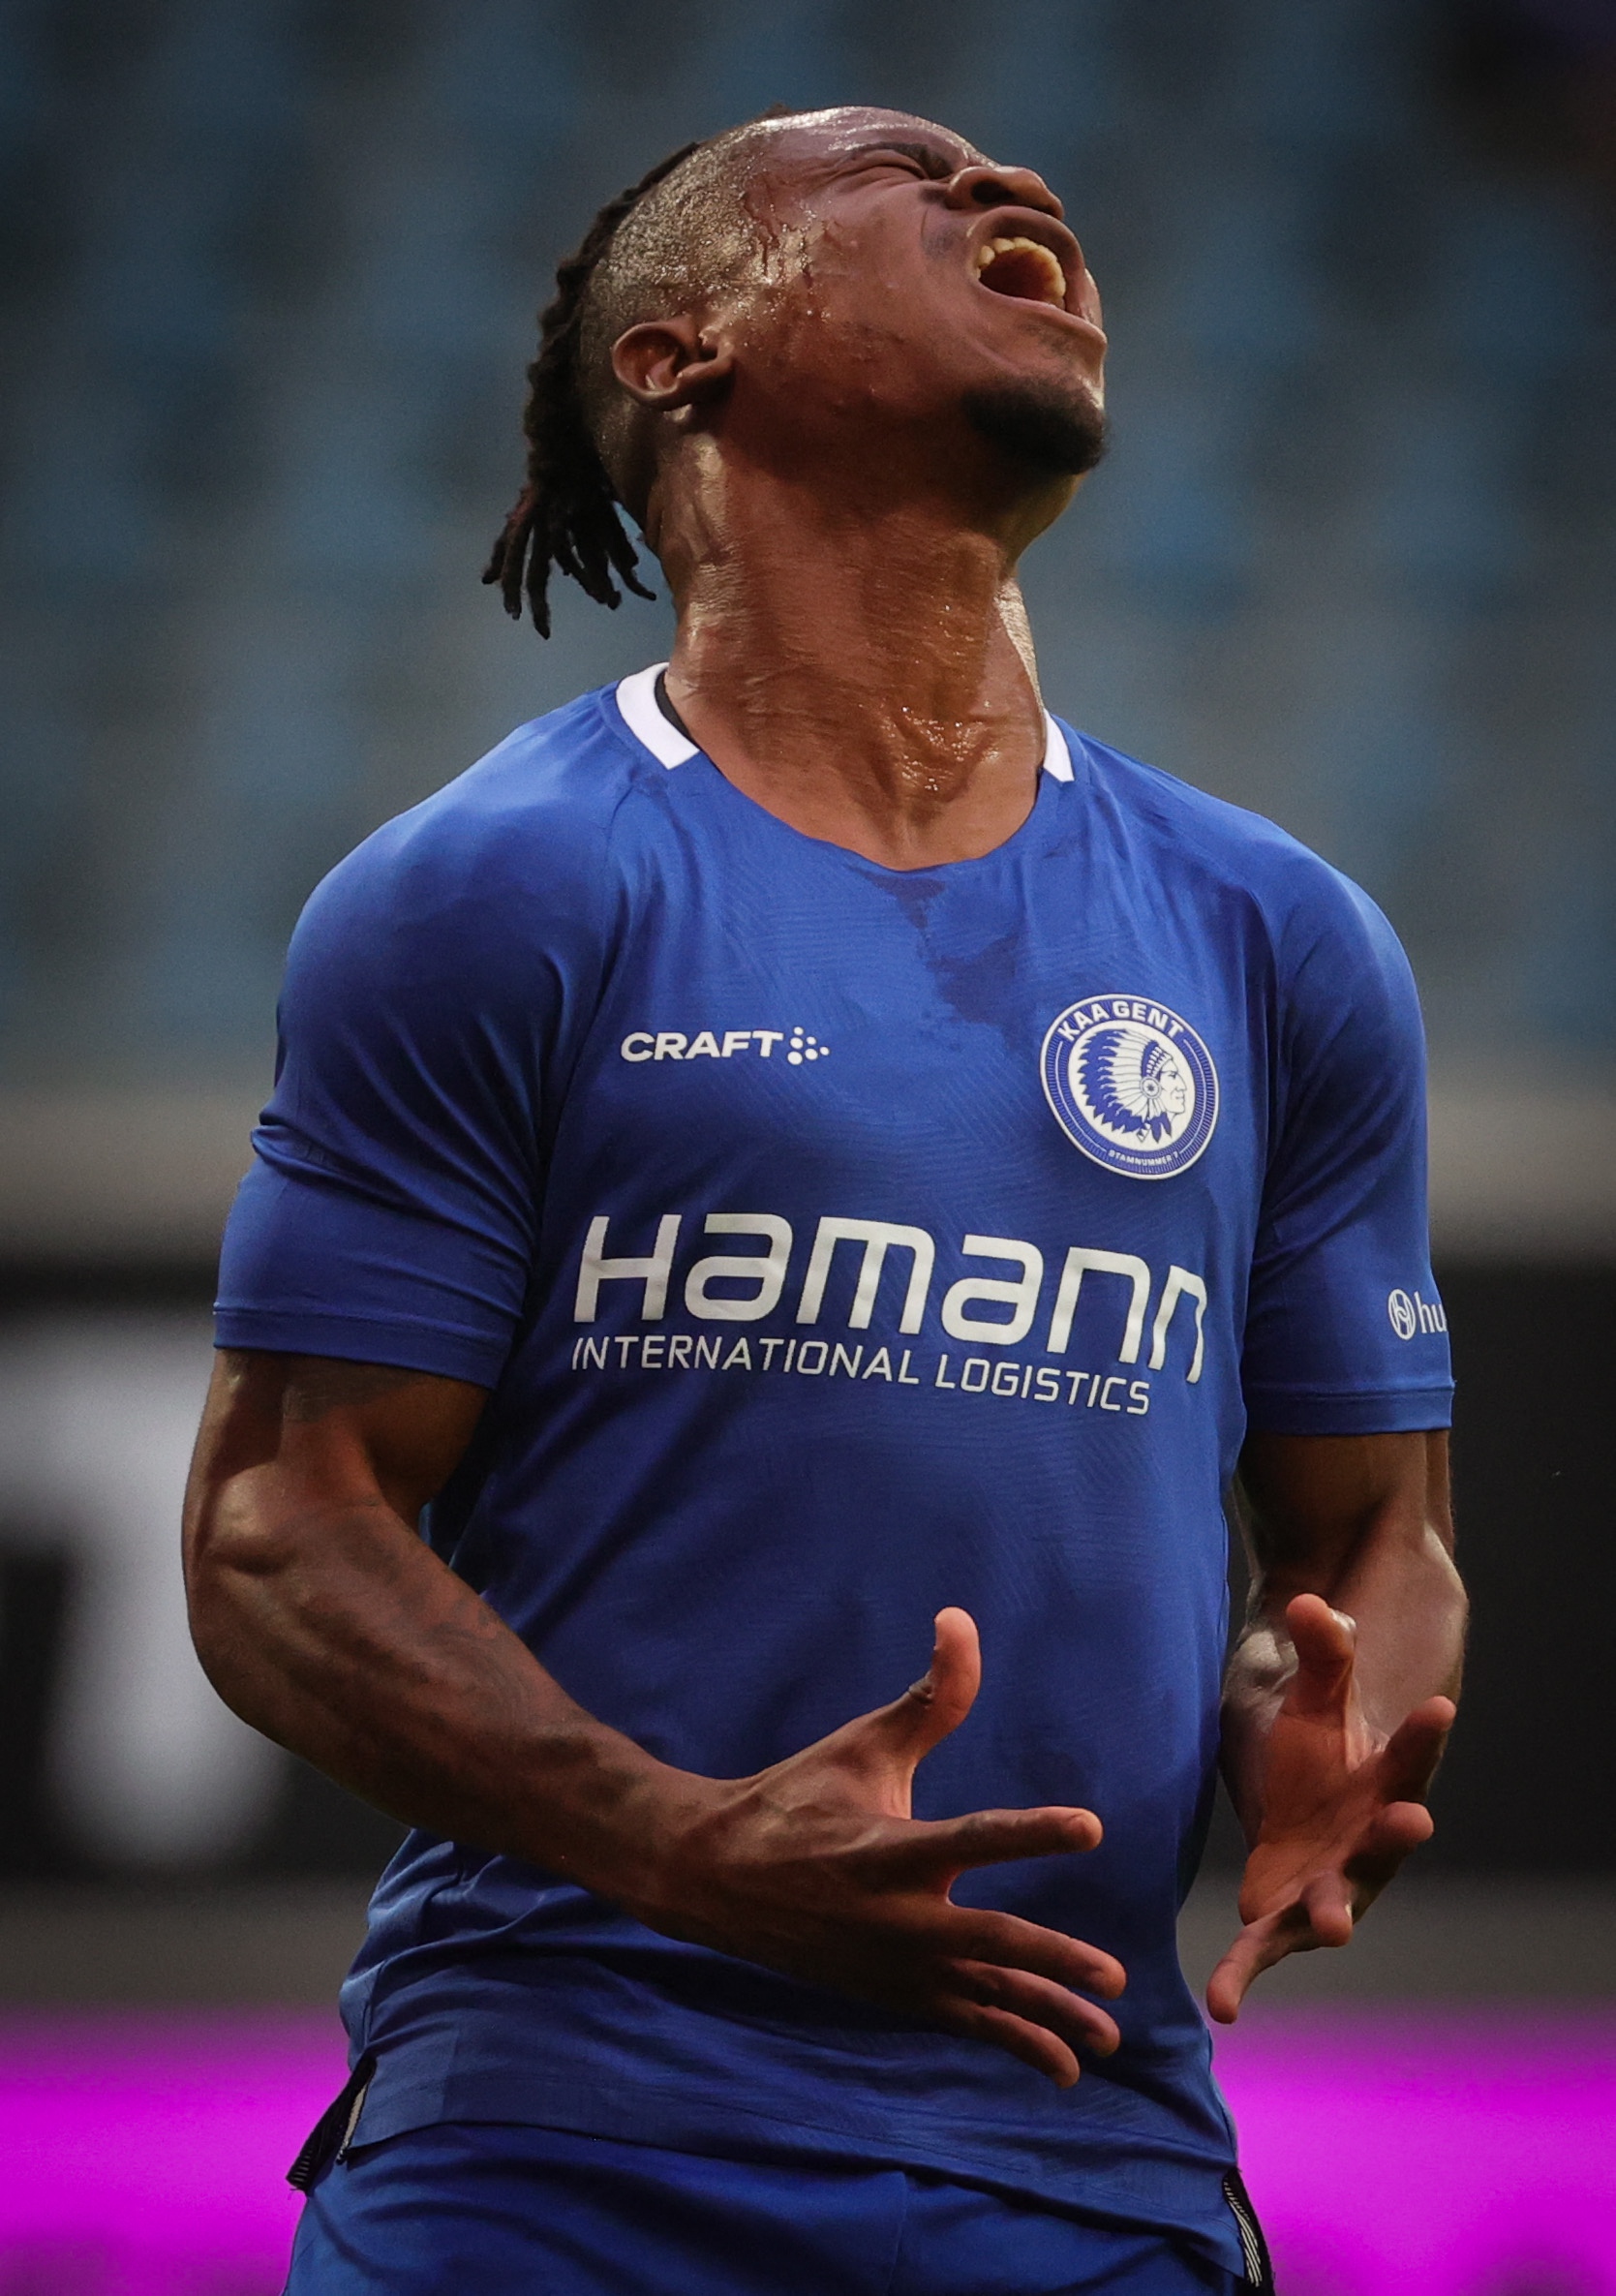 Gift Orban displayed an exceptional performance, picking up right where he left off last season, and he sealed it off with a fantastic goal to lead KAA Gent to a resounding victory over MSK AZilina on Thursday evening.  The 21-year-old Nigerian forward was the star of the show, finding the back of the net and helping the Belgian Pro League side secure a dominant 5-1 win over ten-man MSK AZilina during their Europa Conference League second Qualifying round leg one at the Ghelamco Arena.  In just 23 minutes into the game, Gift Orban opened the scoring with a brilliant right-footed shot from the center of the box, giving the home team a well-deserved lead.  Despite their clear dominance in the first half, Gent could only convert one of their numerous chances, thanks to Gift Orban's prowess.  However, their determination didn't waver as they started the second half on a high note. Within ten minutes, Julien De Sart struck with another right-footed shot, doubling their lead.   The scoreboard read 3-0 after 63 minutes when Hugo Cuypers added another goal to Gent's tally.  MSK AZilina's hopes took a blow when Dominik Javorcek received a second yellow card from the center referee, Visar Kastrati, reducing them to ten men.  Gent capitalized on their numerical advantage, and three minutes later, Tsuyoshi Watanabe found the back of the net, extending the lead to 4-0.  Though Adrian Kapralik managed to score a consolation goal for the visitors, Hugo Cuypers combined beautifully with Tarik Tissoudali to compound their misery and make it a staggering 5-1 scoreline.  https://twitter.com/KAAGent/status/1684652478631976961?t=vUl-wgIVunxF5vuV3Wwz5A&s=19  Gift Orban's remarkable performance and the overall team display demonstrated KAA Gent's strength and determination as they secured a convincing victory in the Europa Conference League. 